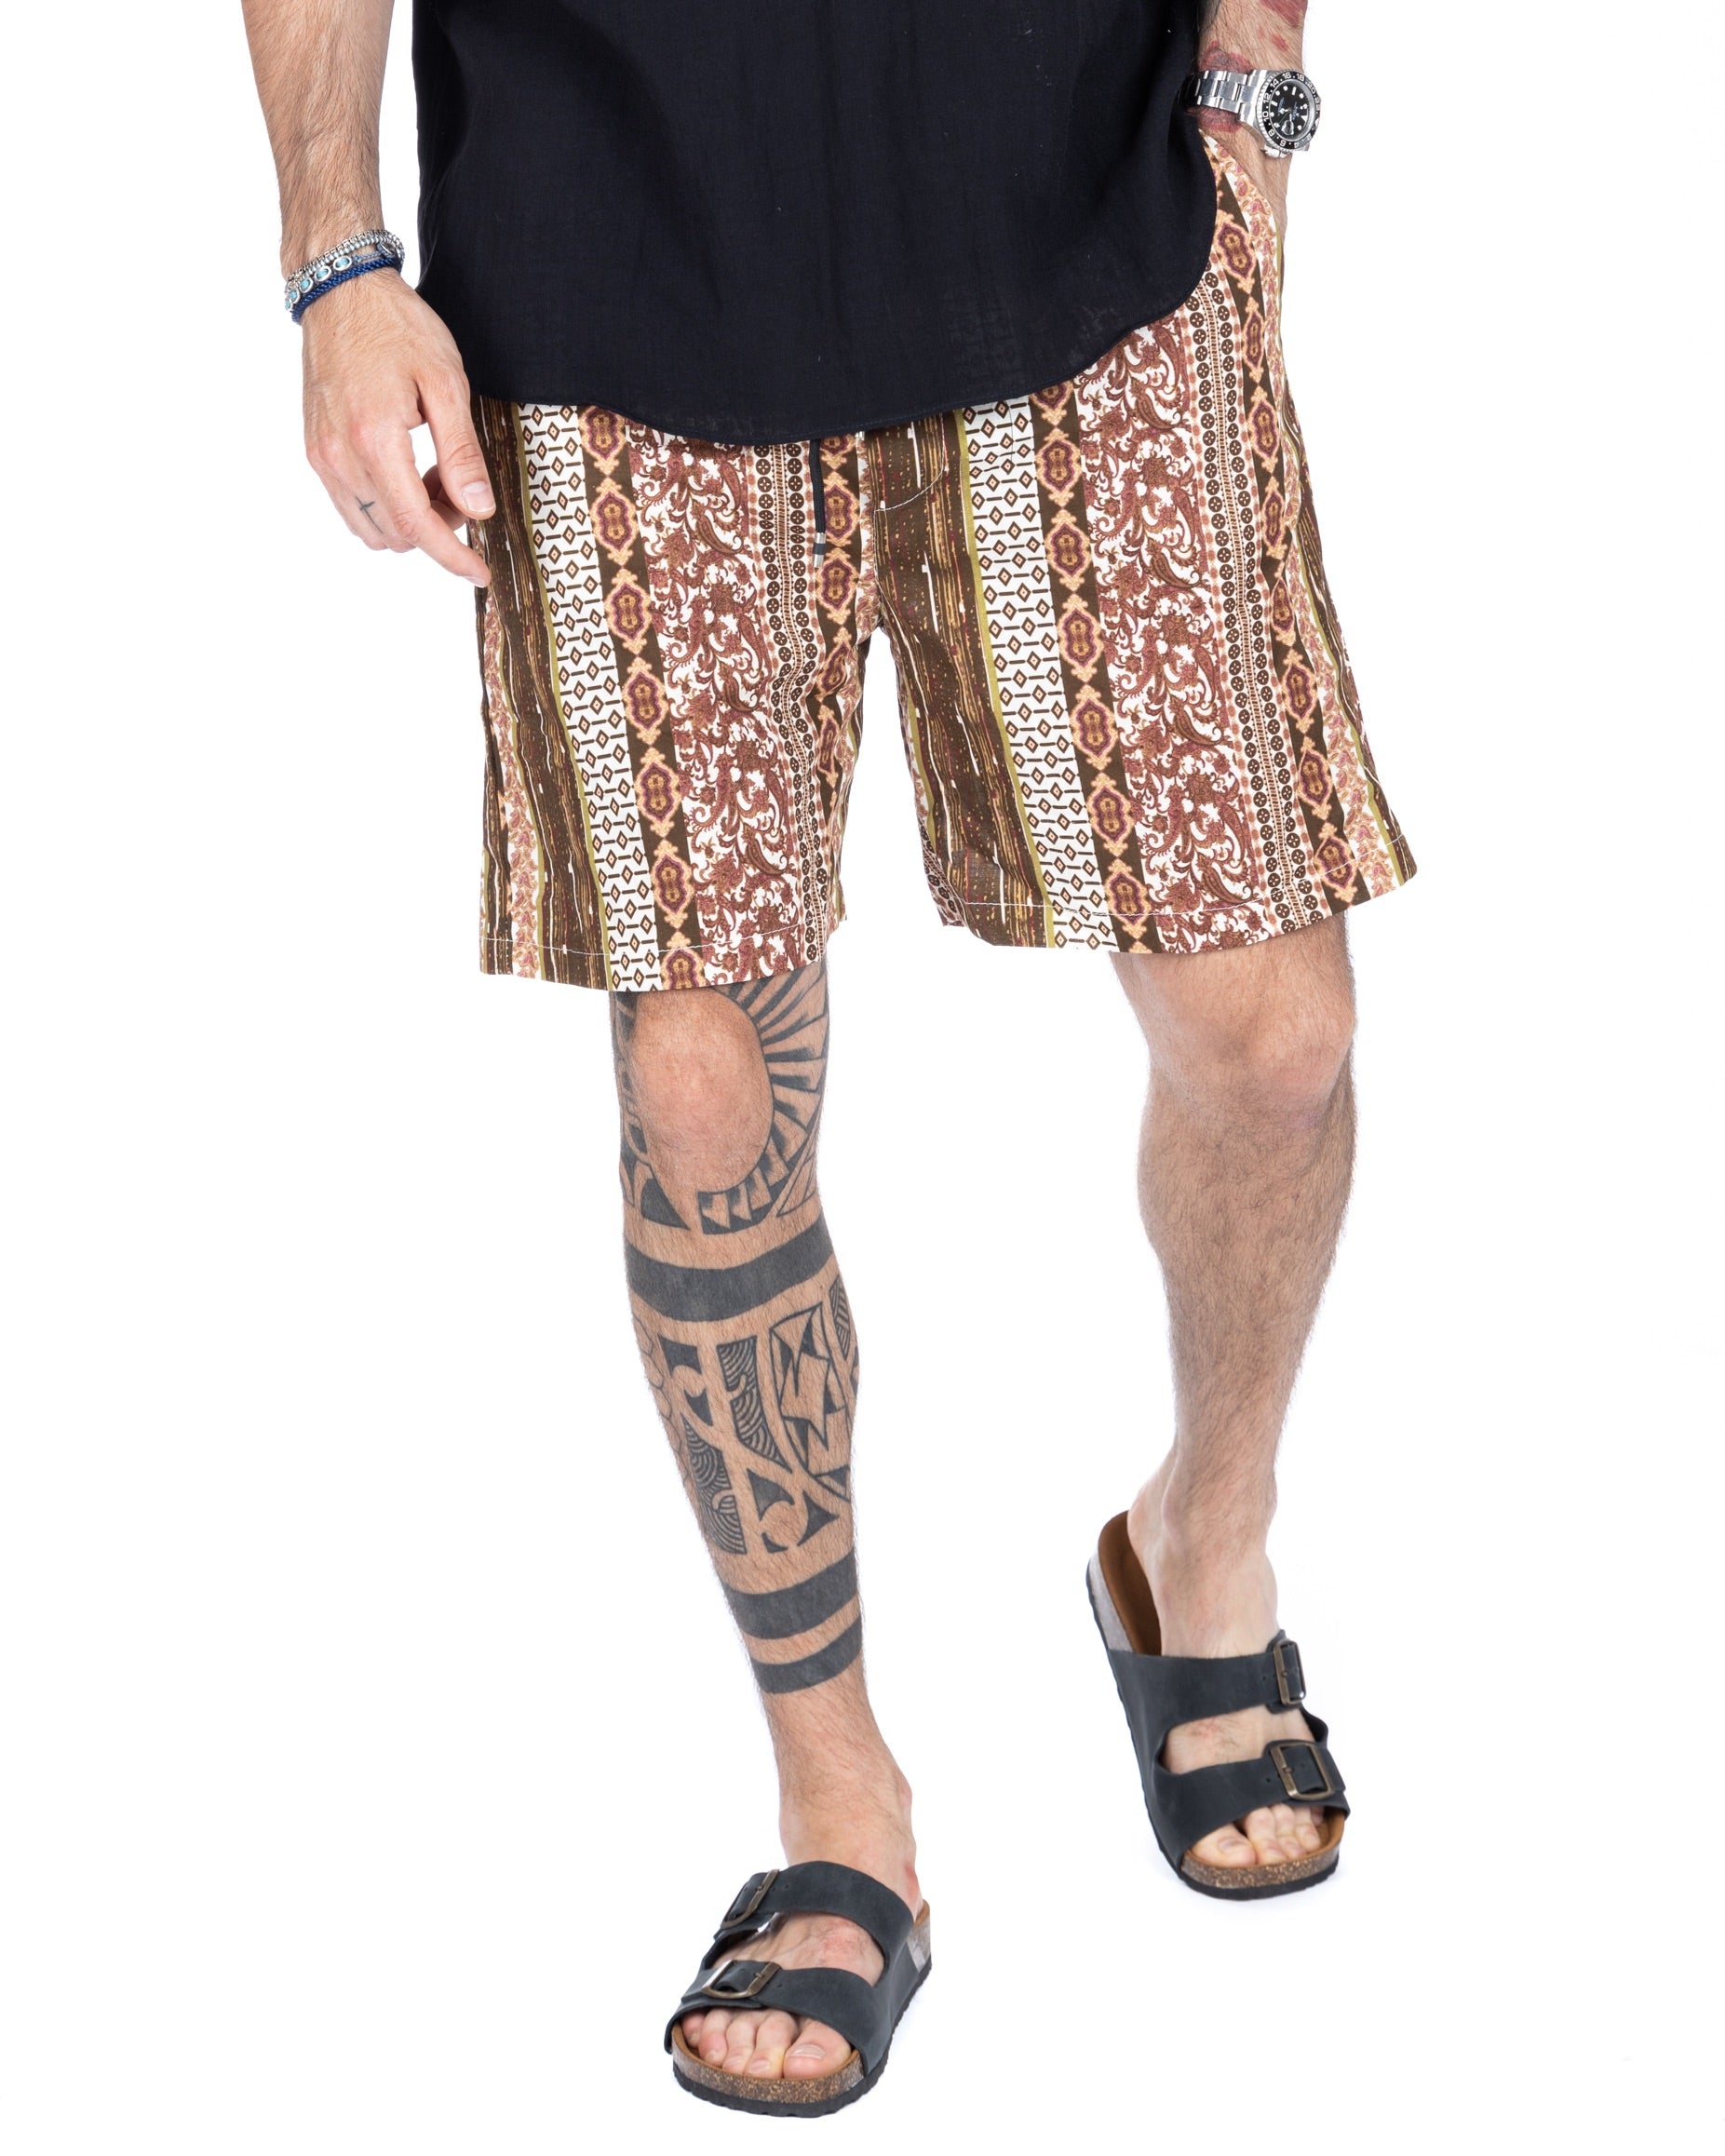 Cairo - Bermuda shorts with printed lace